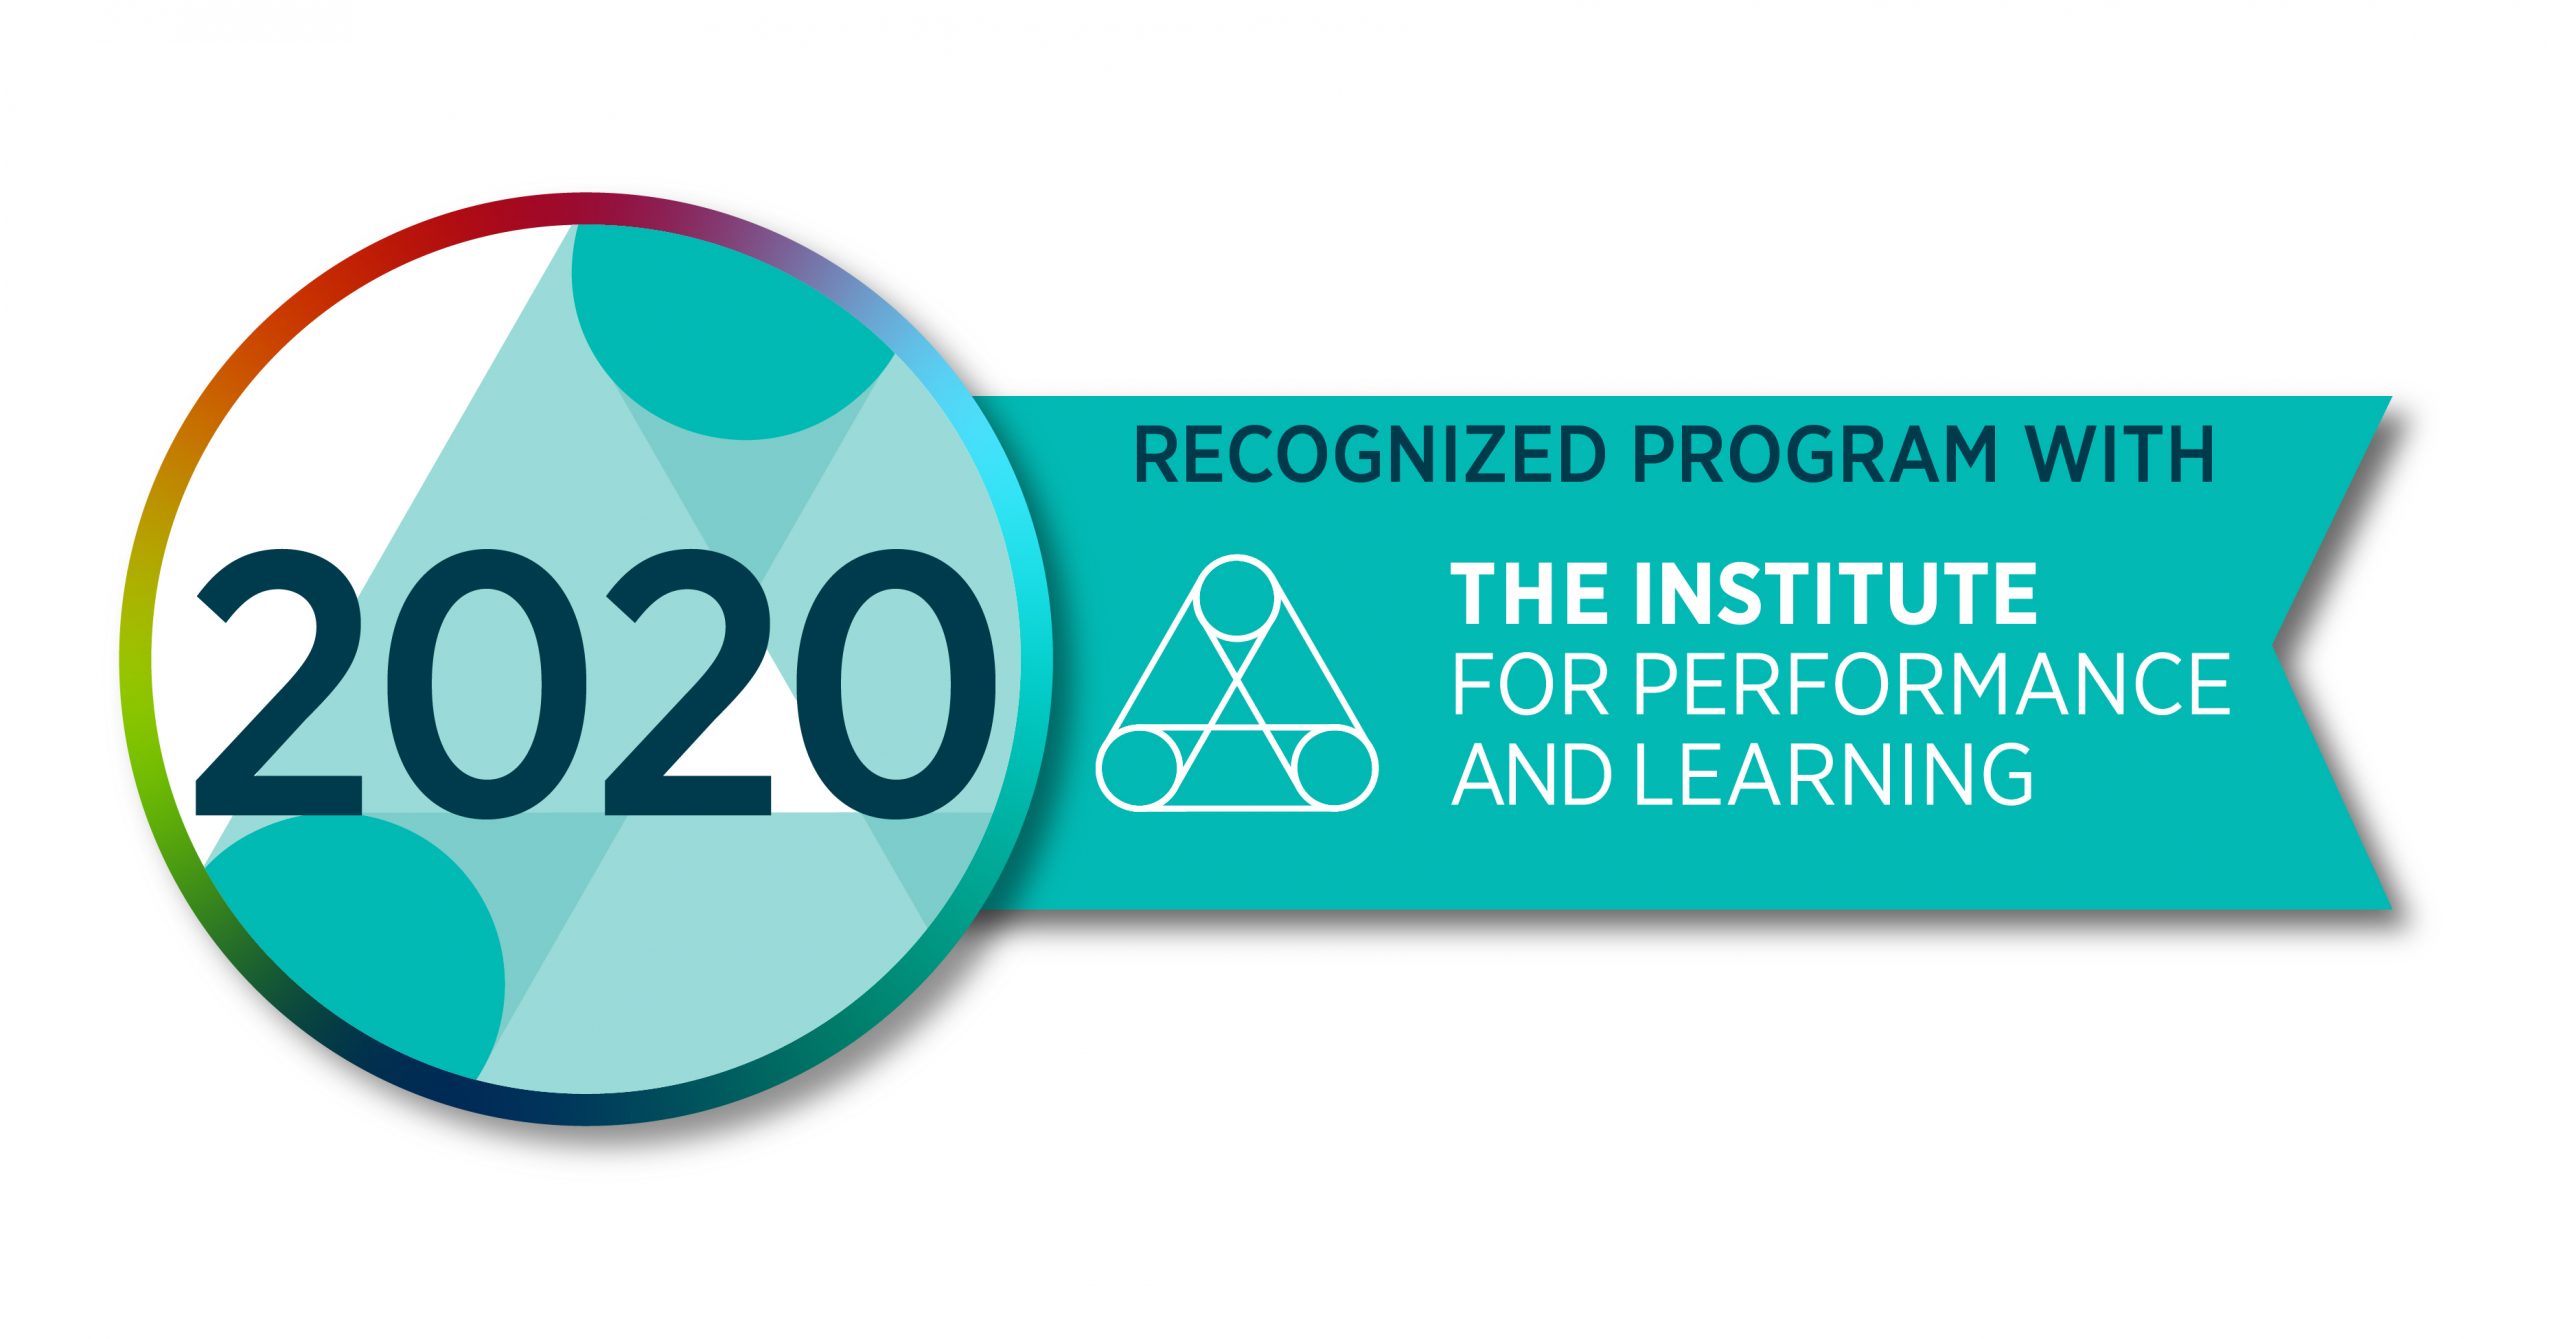 Recognized program with The Institute for Performance and Learning 2020